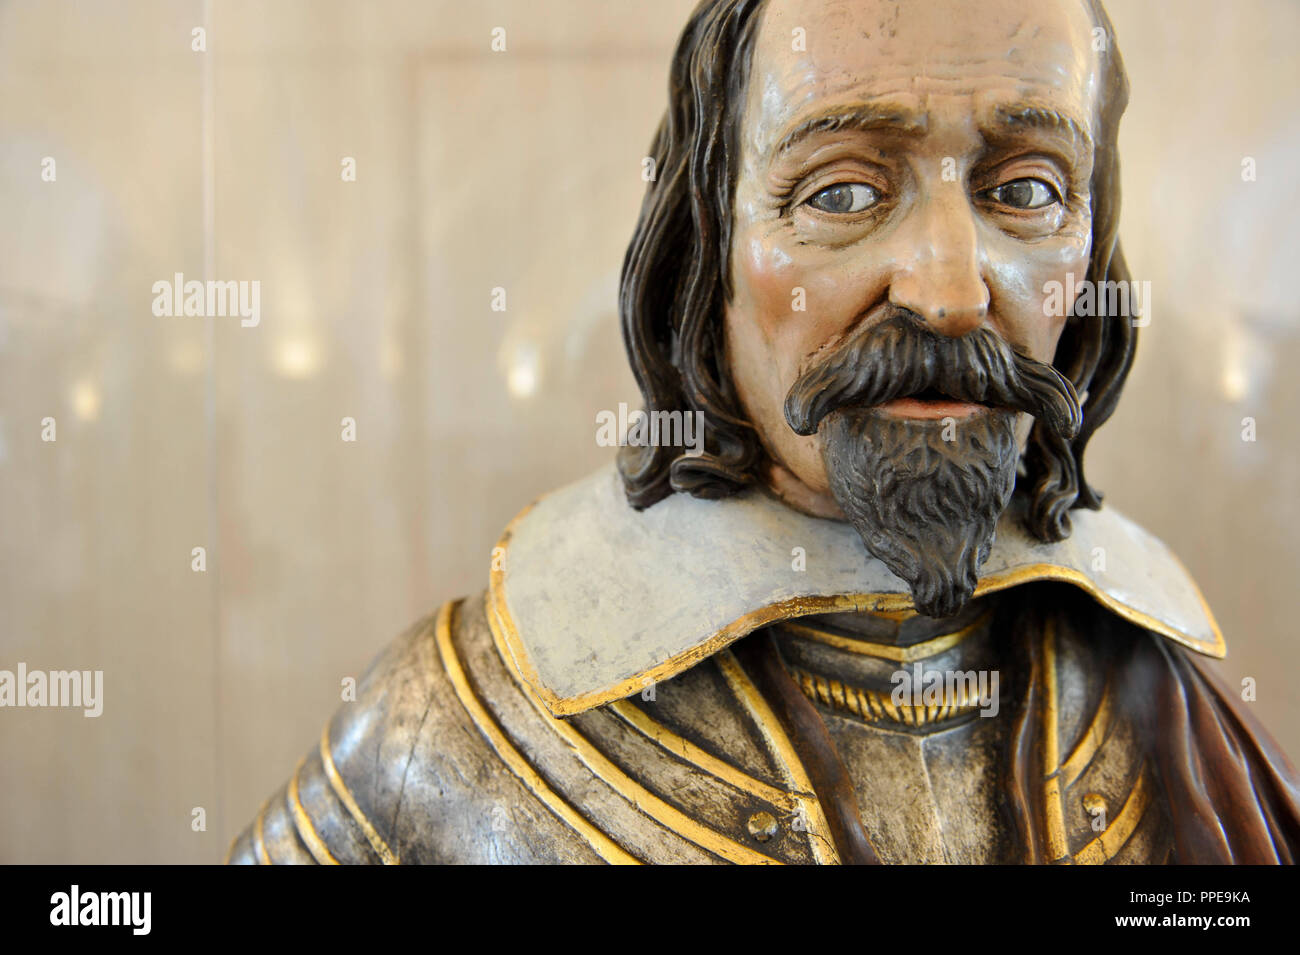 The statue of Maximilian I, Elector of Bavaria (basswood, 1650) in the permanent exhibition 'Typically Munich' in the Muenchner Stadtmuseum at Jakobsplatz. Stock Photo